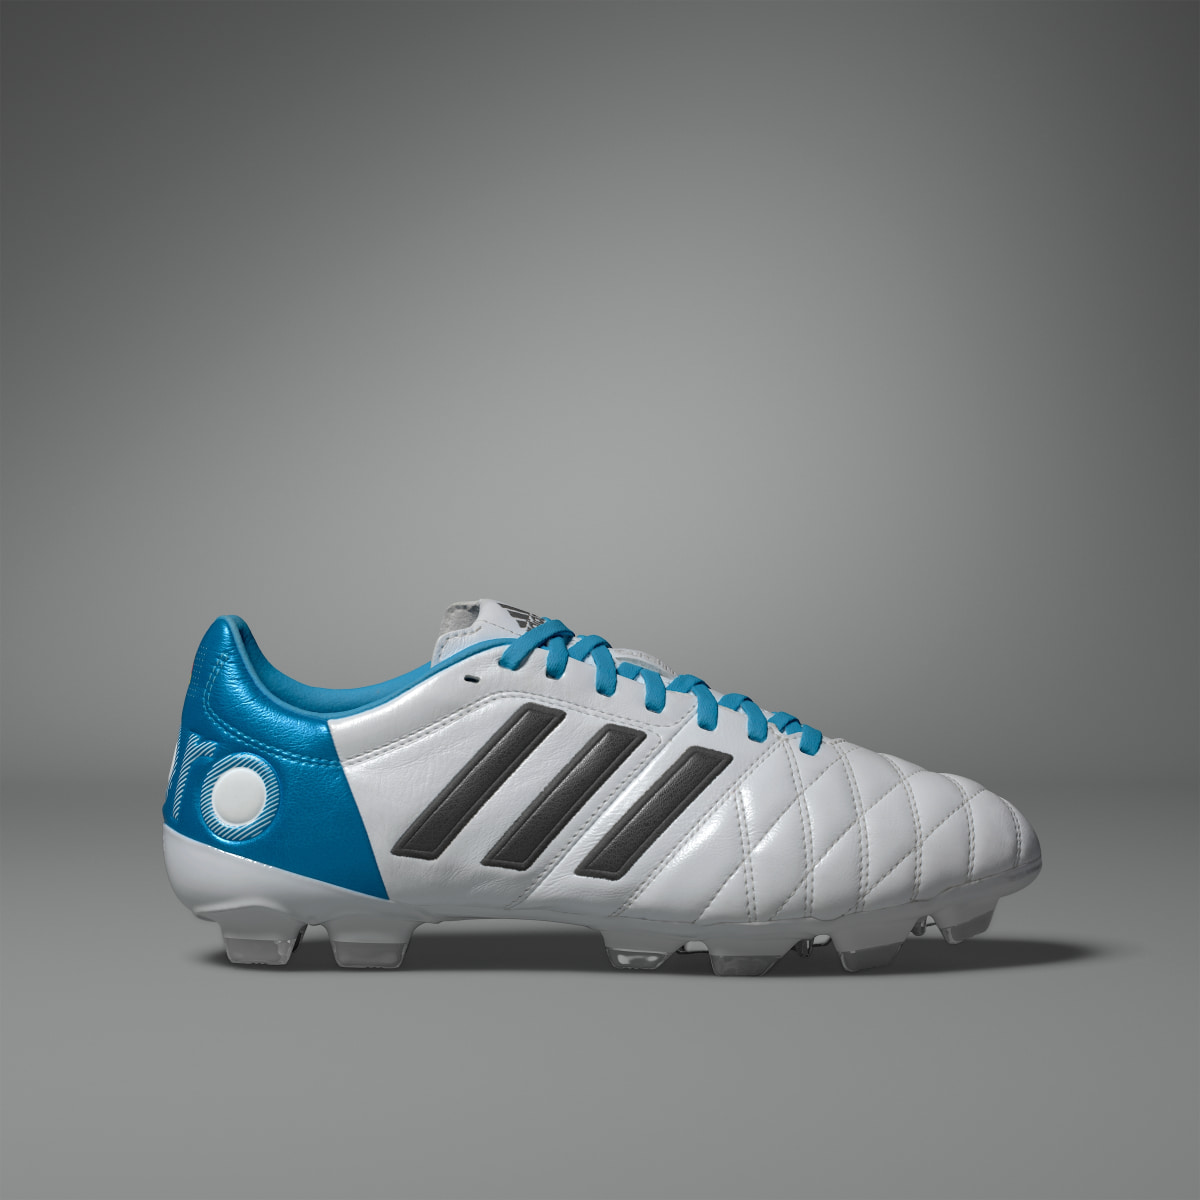 Adidas 11Pro Toni Kroos Firm Ground Soccer Cleats. 4